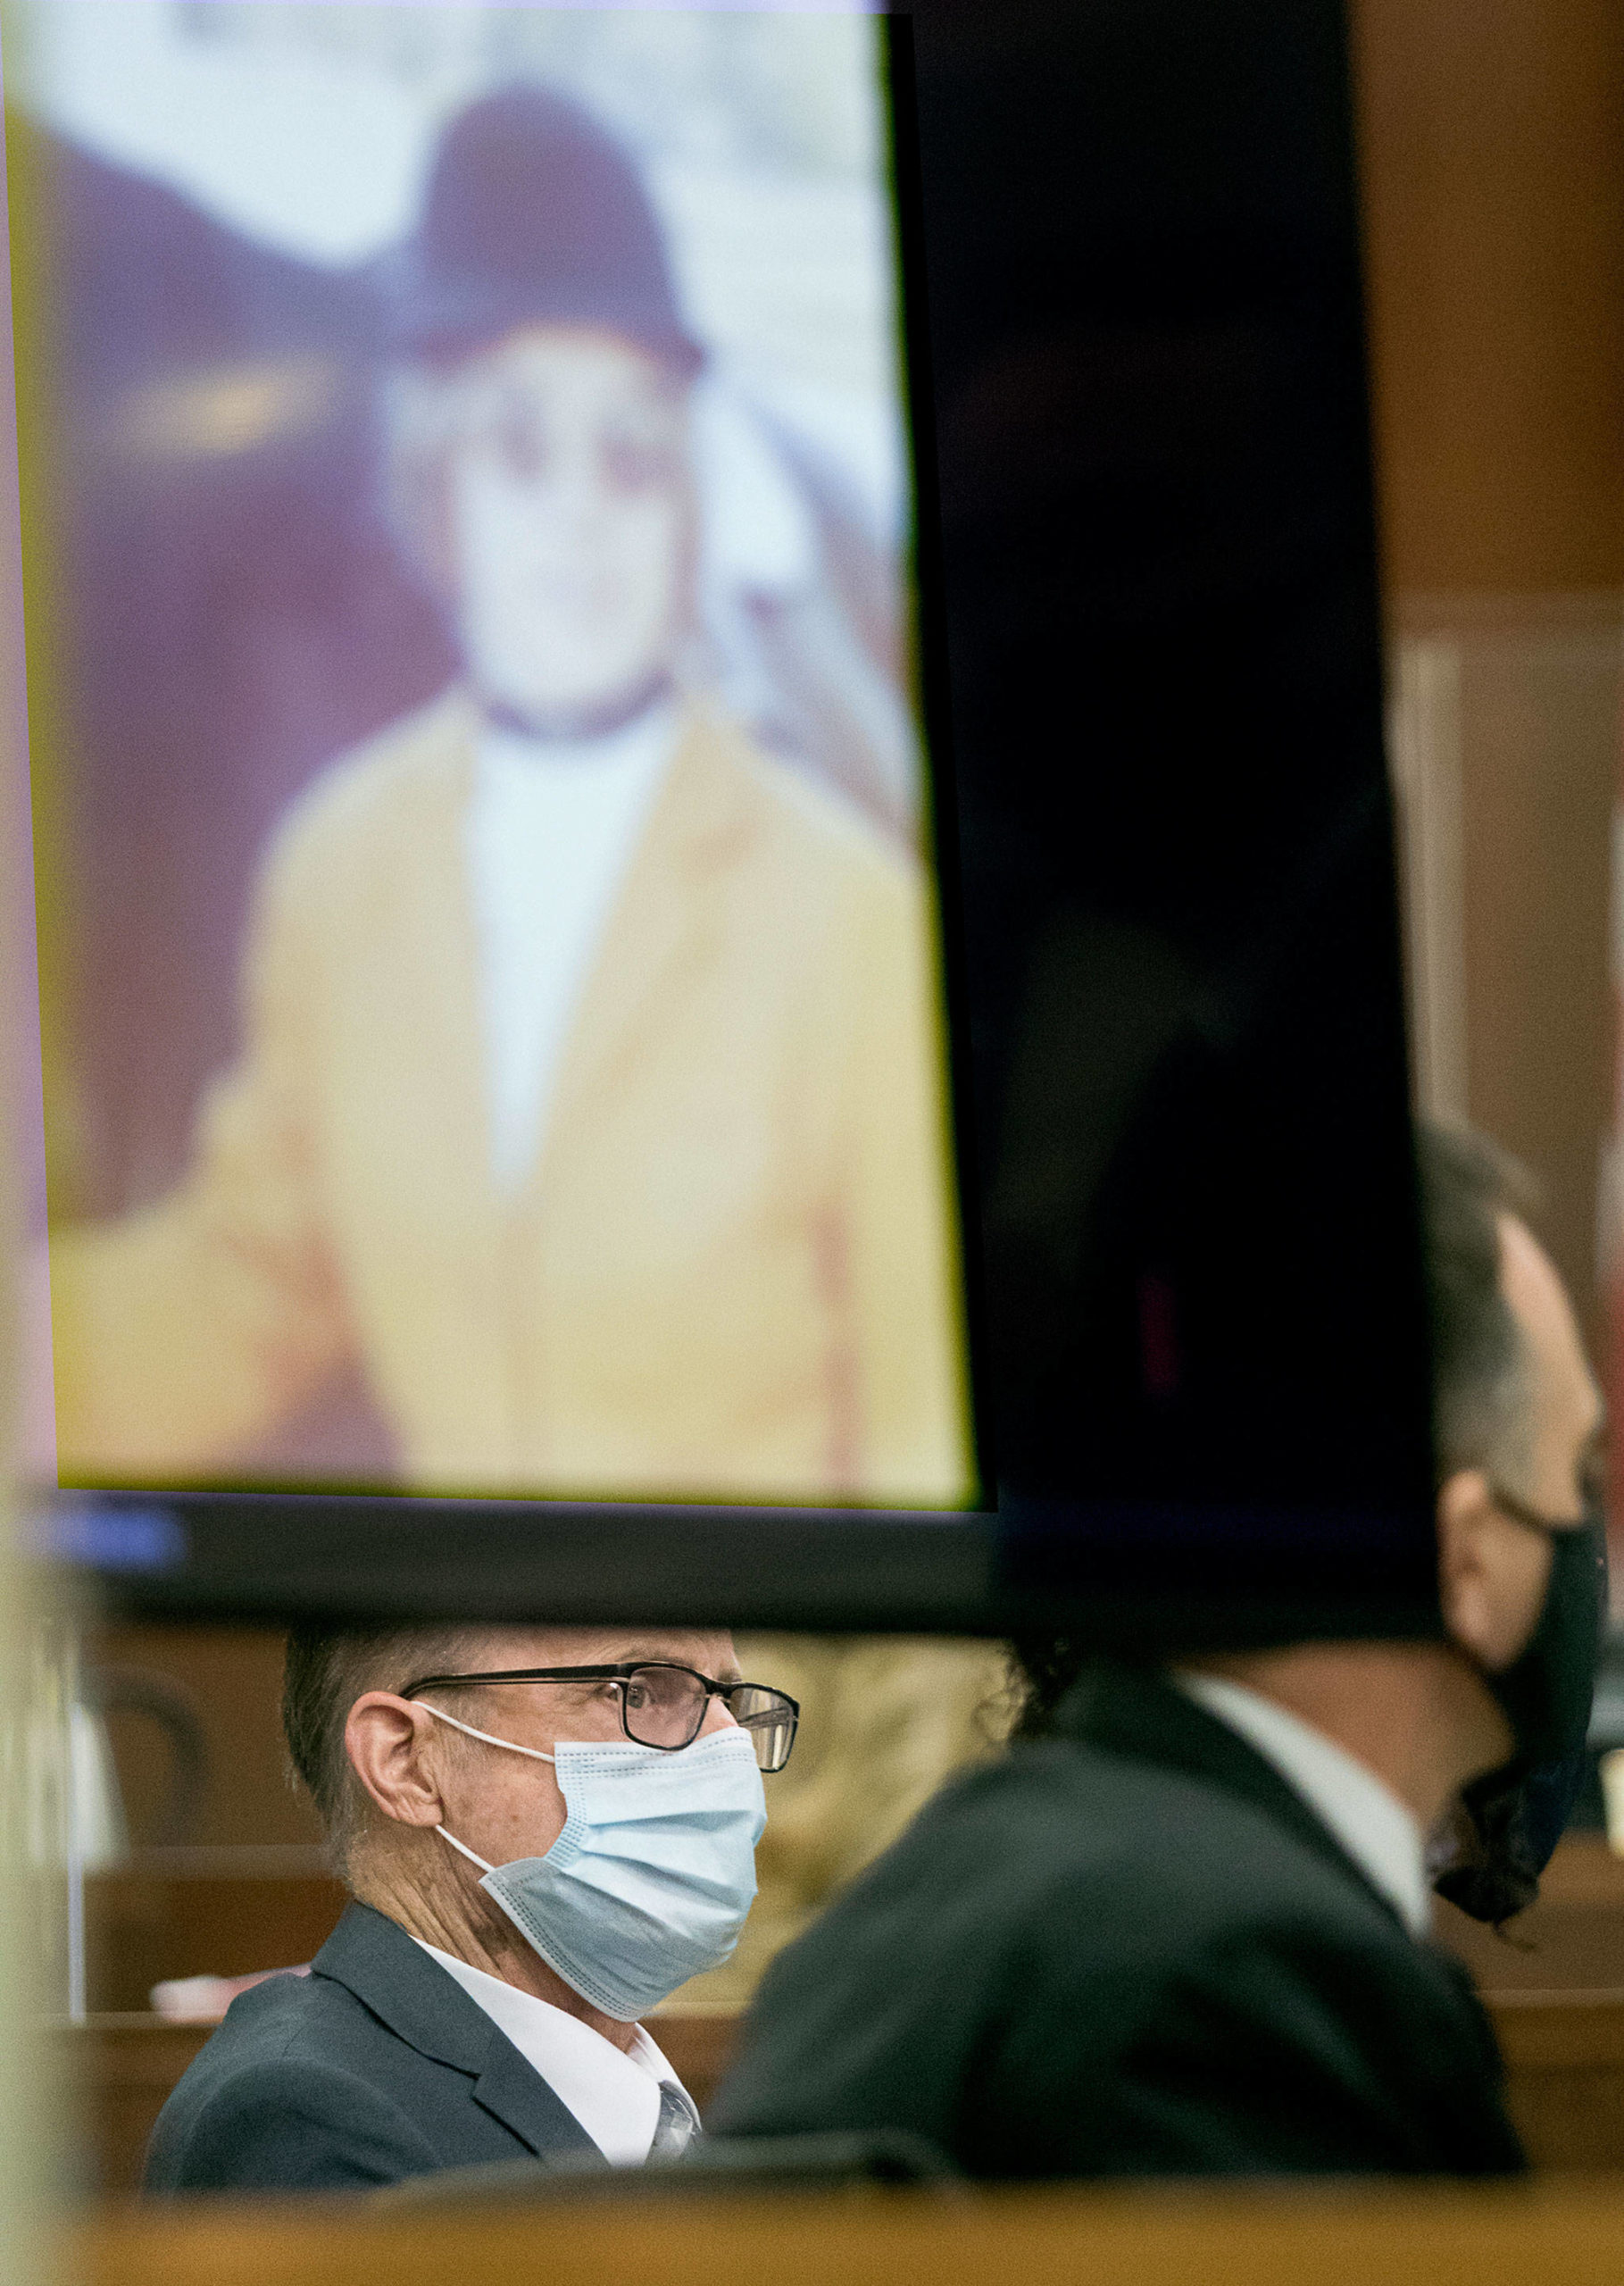 Terrence Miller watches as deputy prosecutor Craig Matheson makes an opening statement at the Snohomish County Courthouse on Monday in Everett. Miller is accused of the 1972 murder of Jody Loomis, seen in a photo wearing horse-riding riding gear. (Andy Bronson / The Herald)